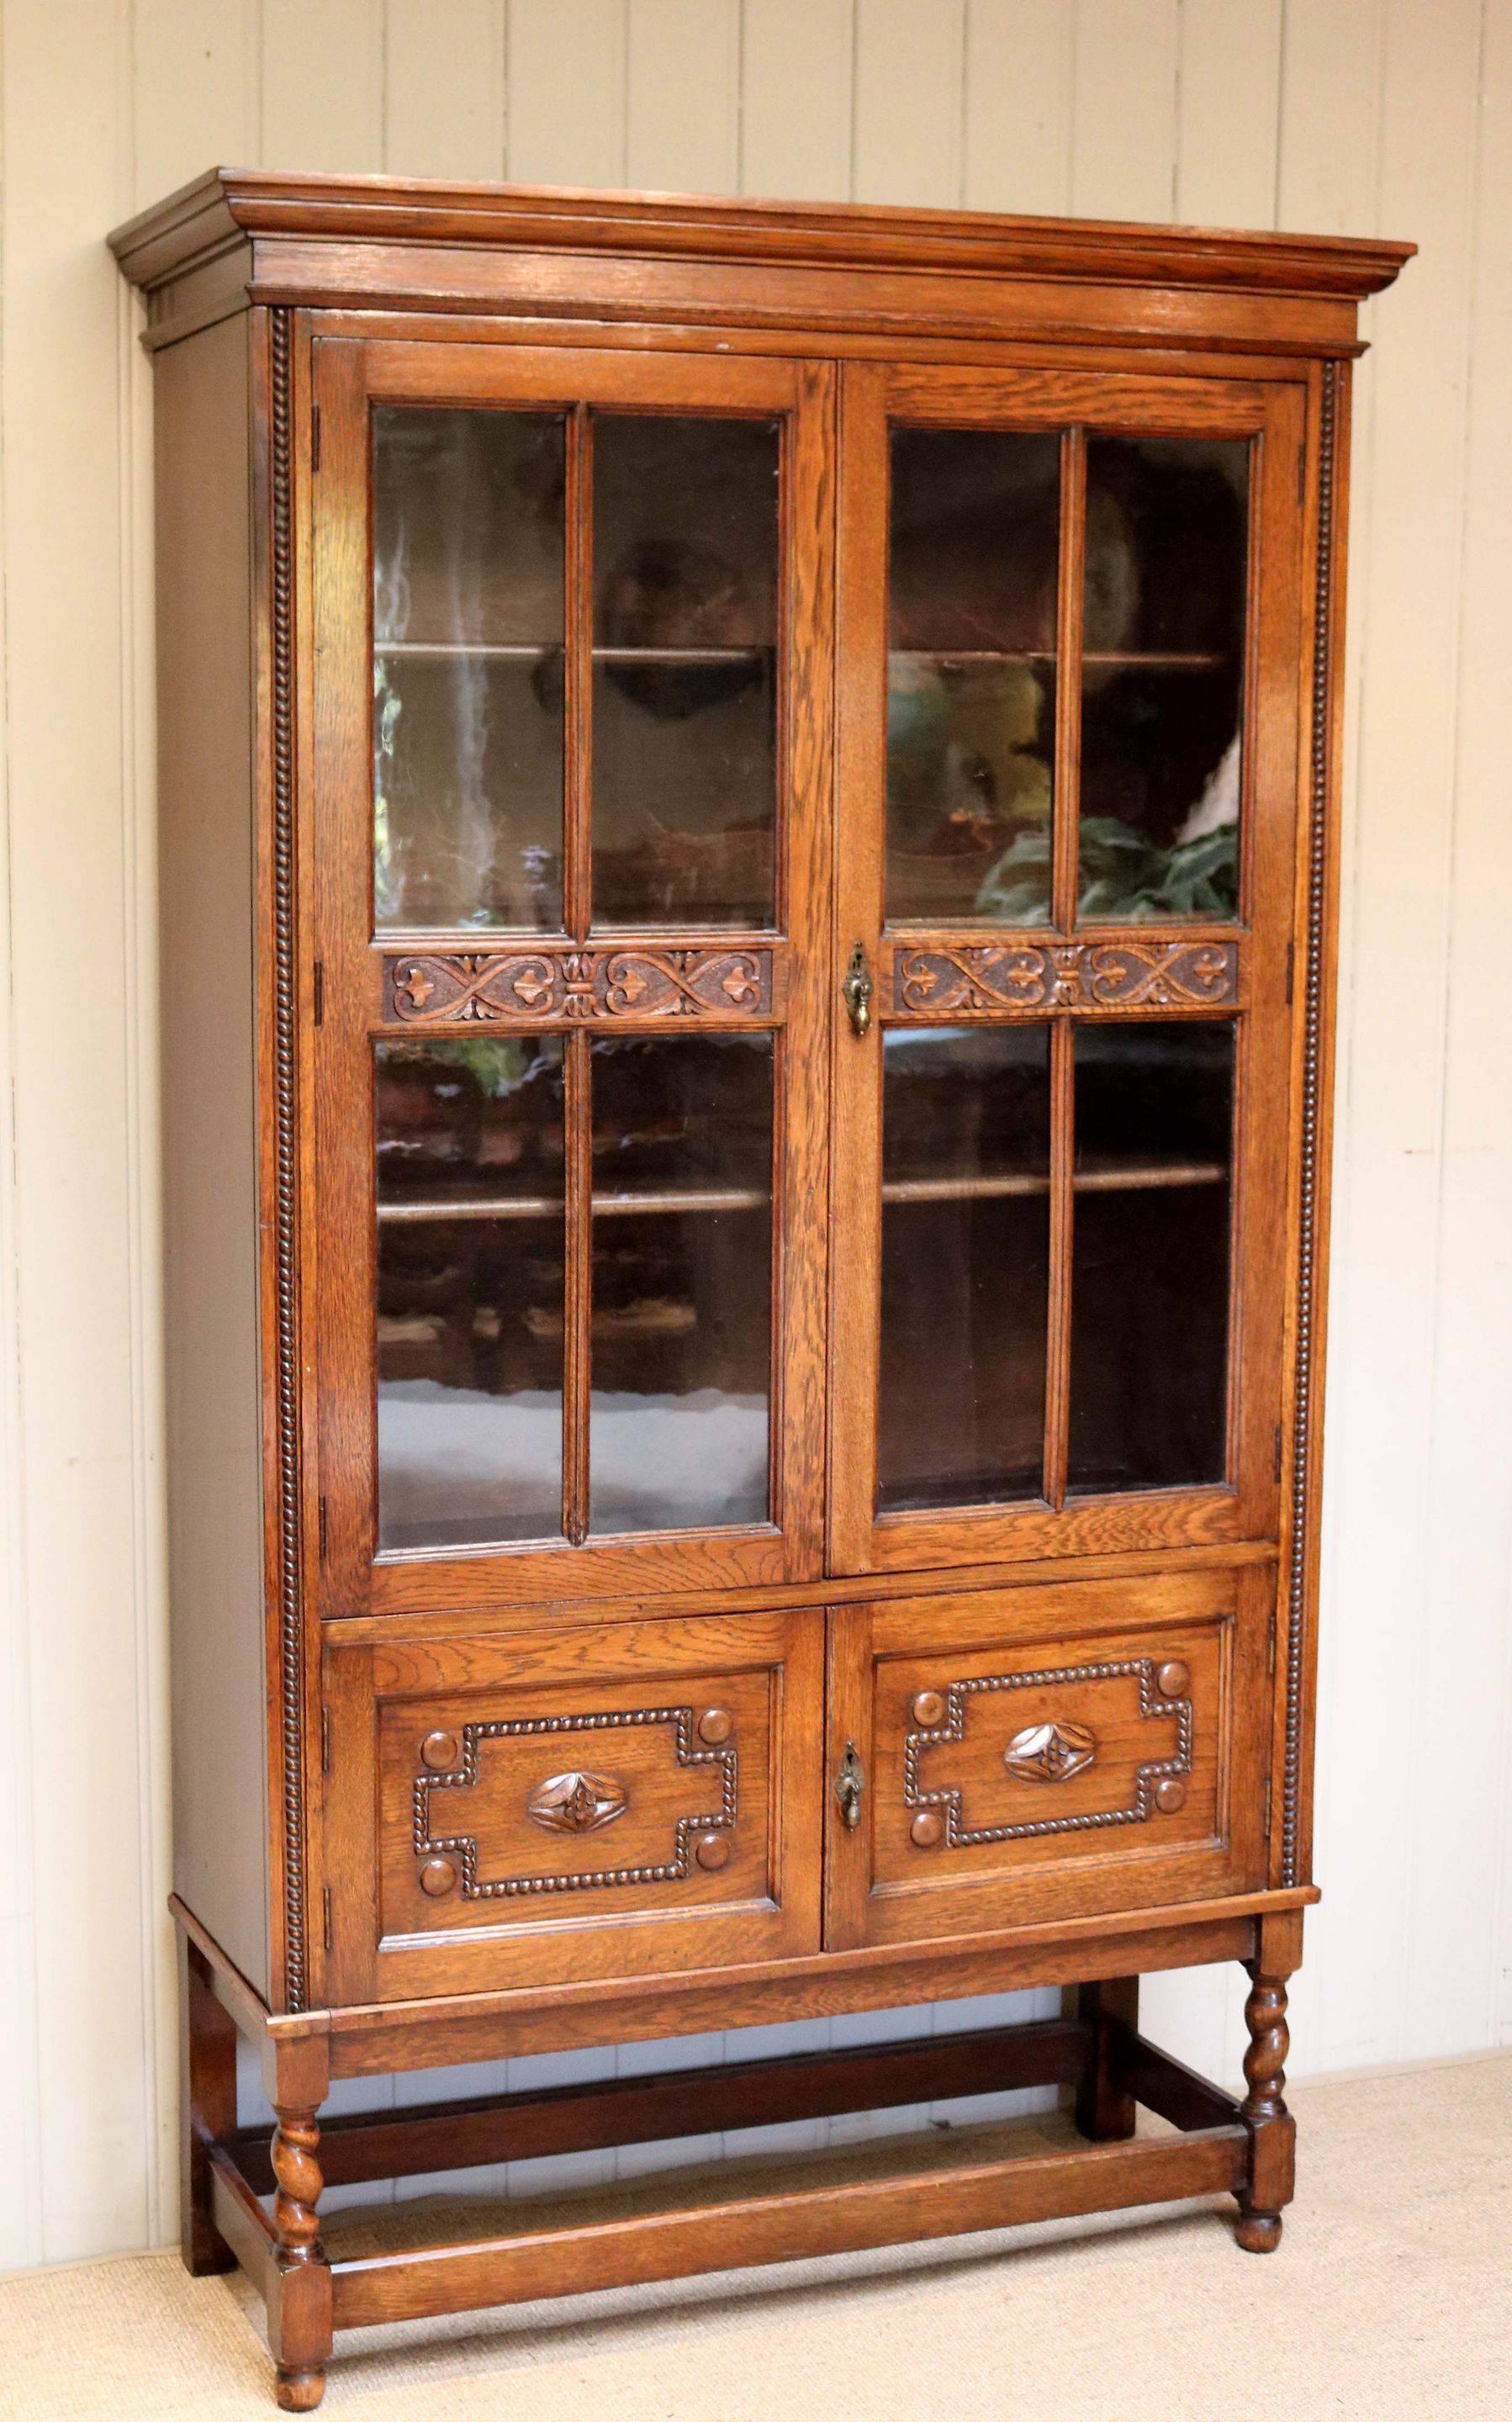 Oak Glazed Cabinet or Bookcase In Good Condition For Sale In Buckinghamshire, GB